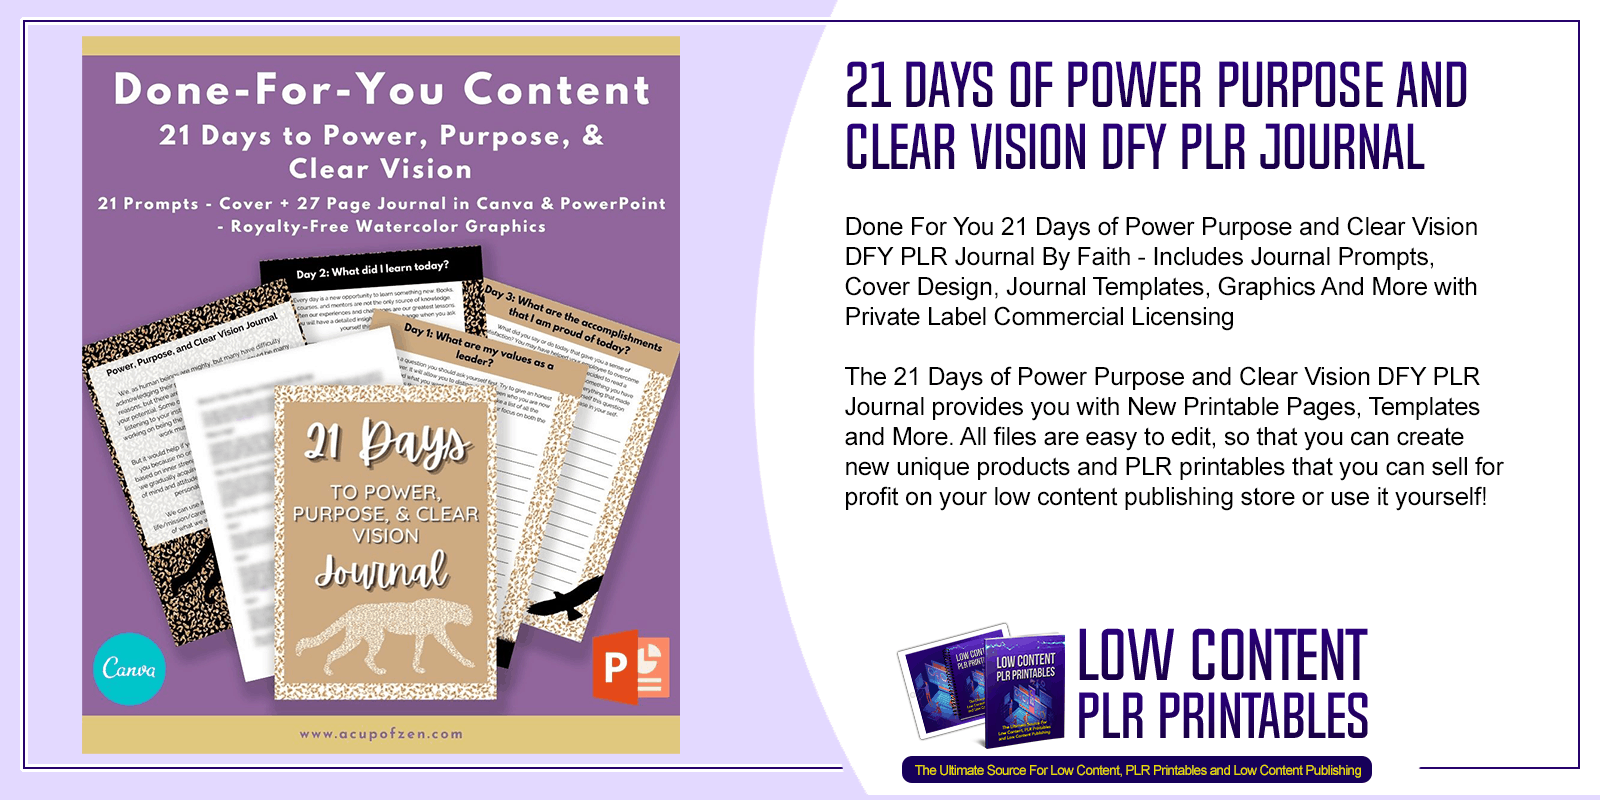 21 Days of Power Purpose and Clear Vision DFY PLR Journal 1